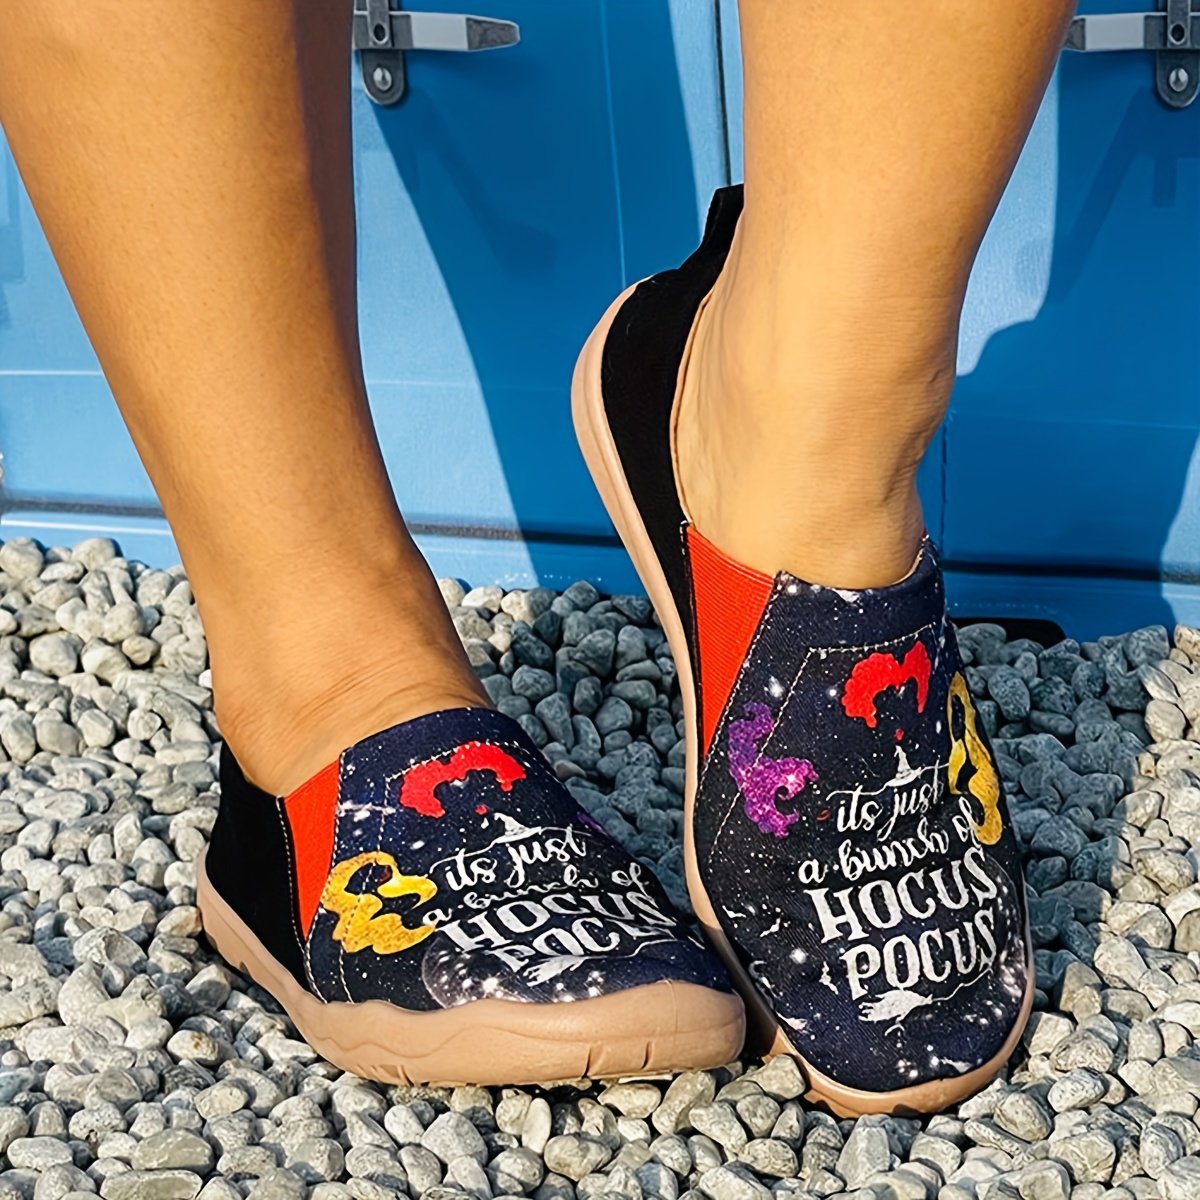 

Halloween-themed Women's Slip-on Sneakers - Cartoon Pattern, Lightweight, All-season Fabric Shoes With Tpr Sole And Comfortable Insole, Random Printing Design For Casual Outdoor Activities